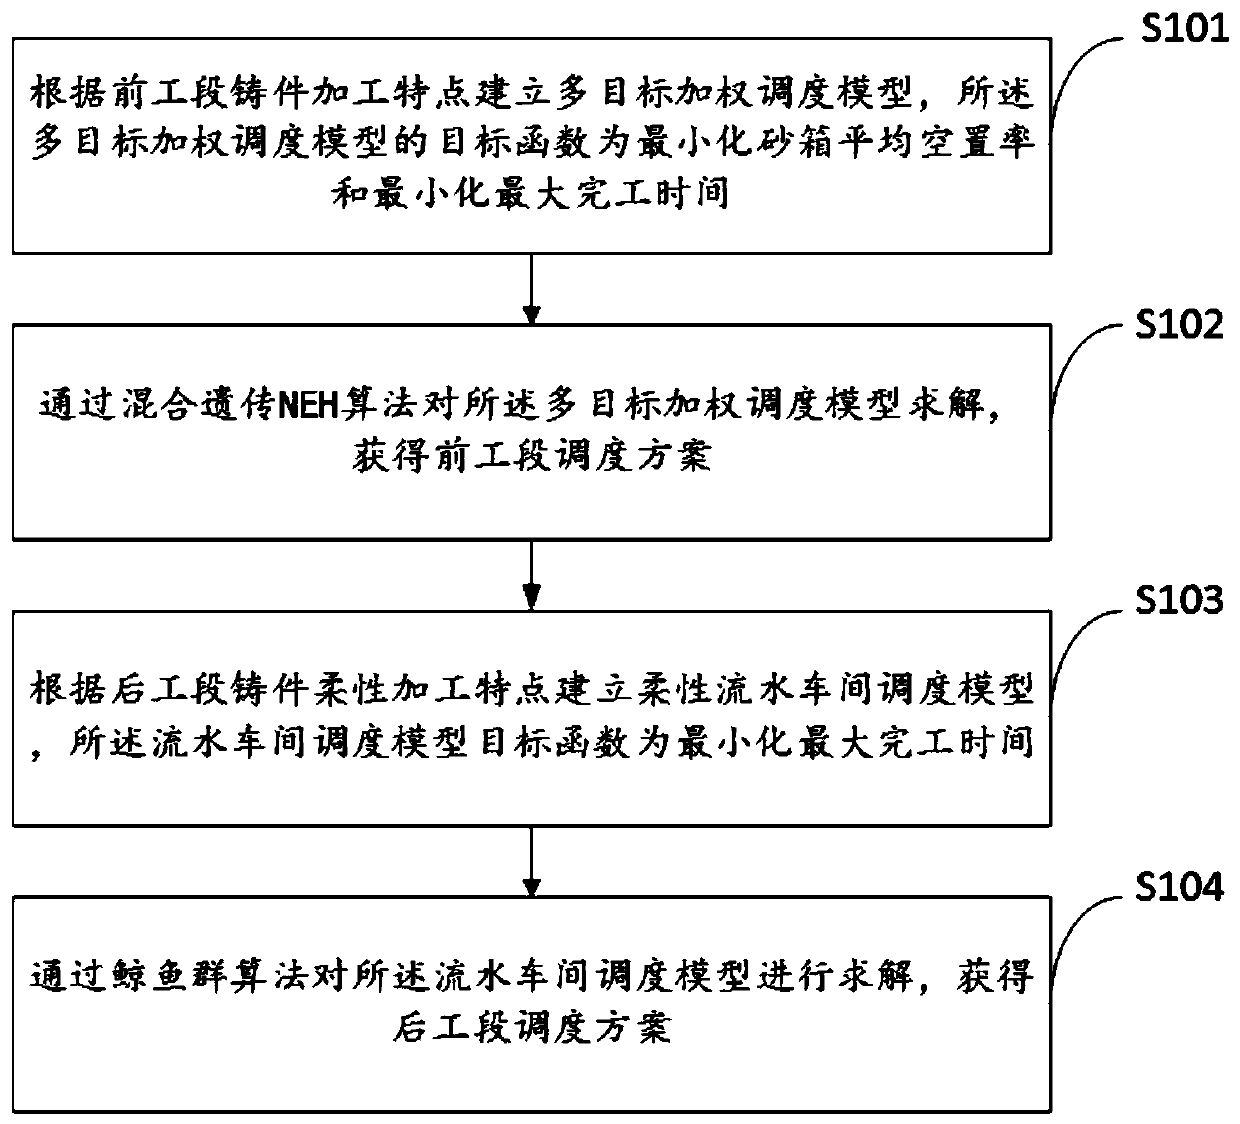 Casting production scheduling method and system